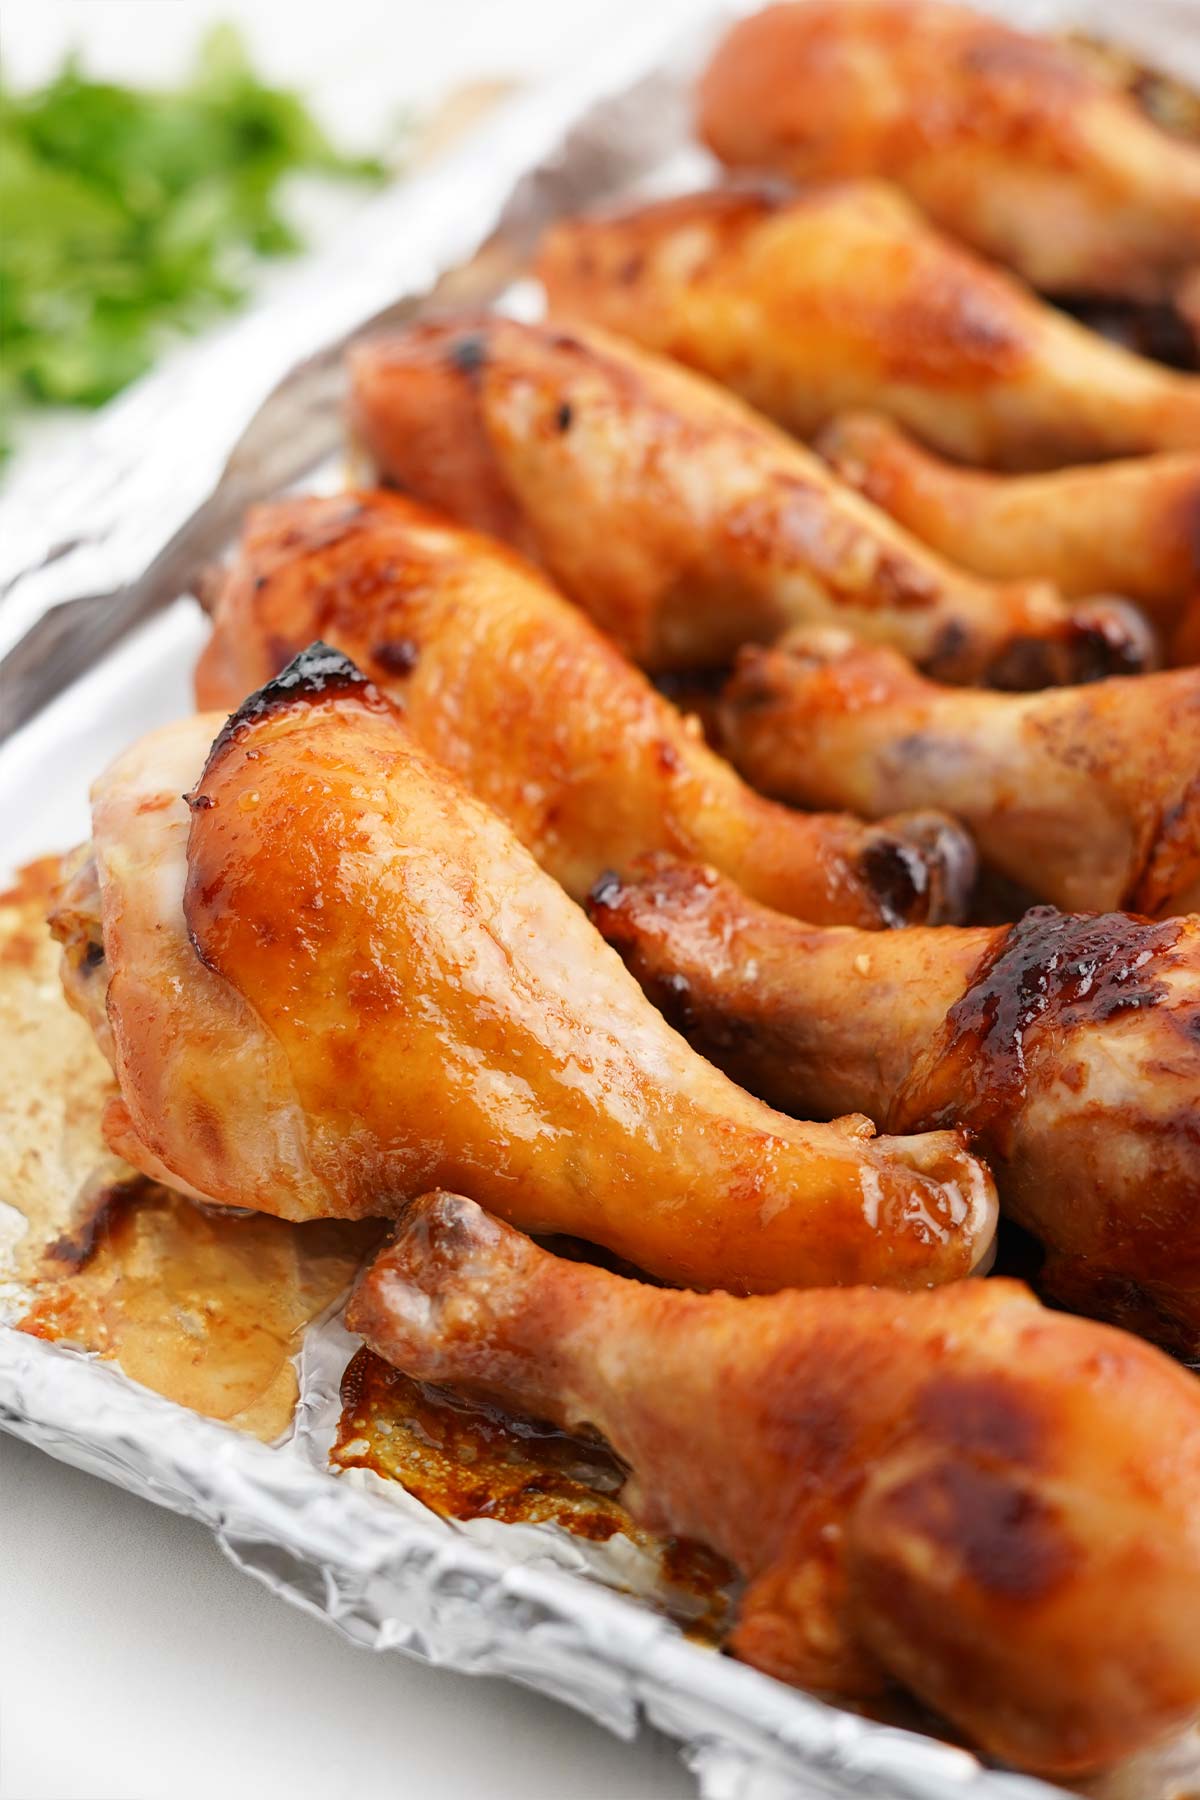 Baked chicken drumsticks on the table.